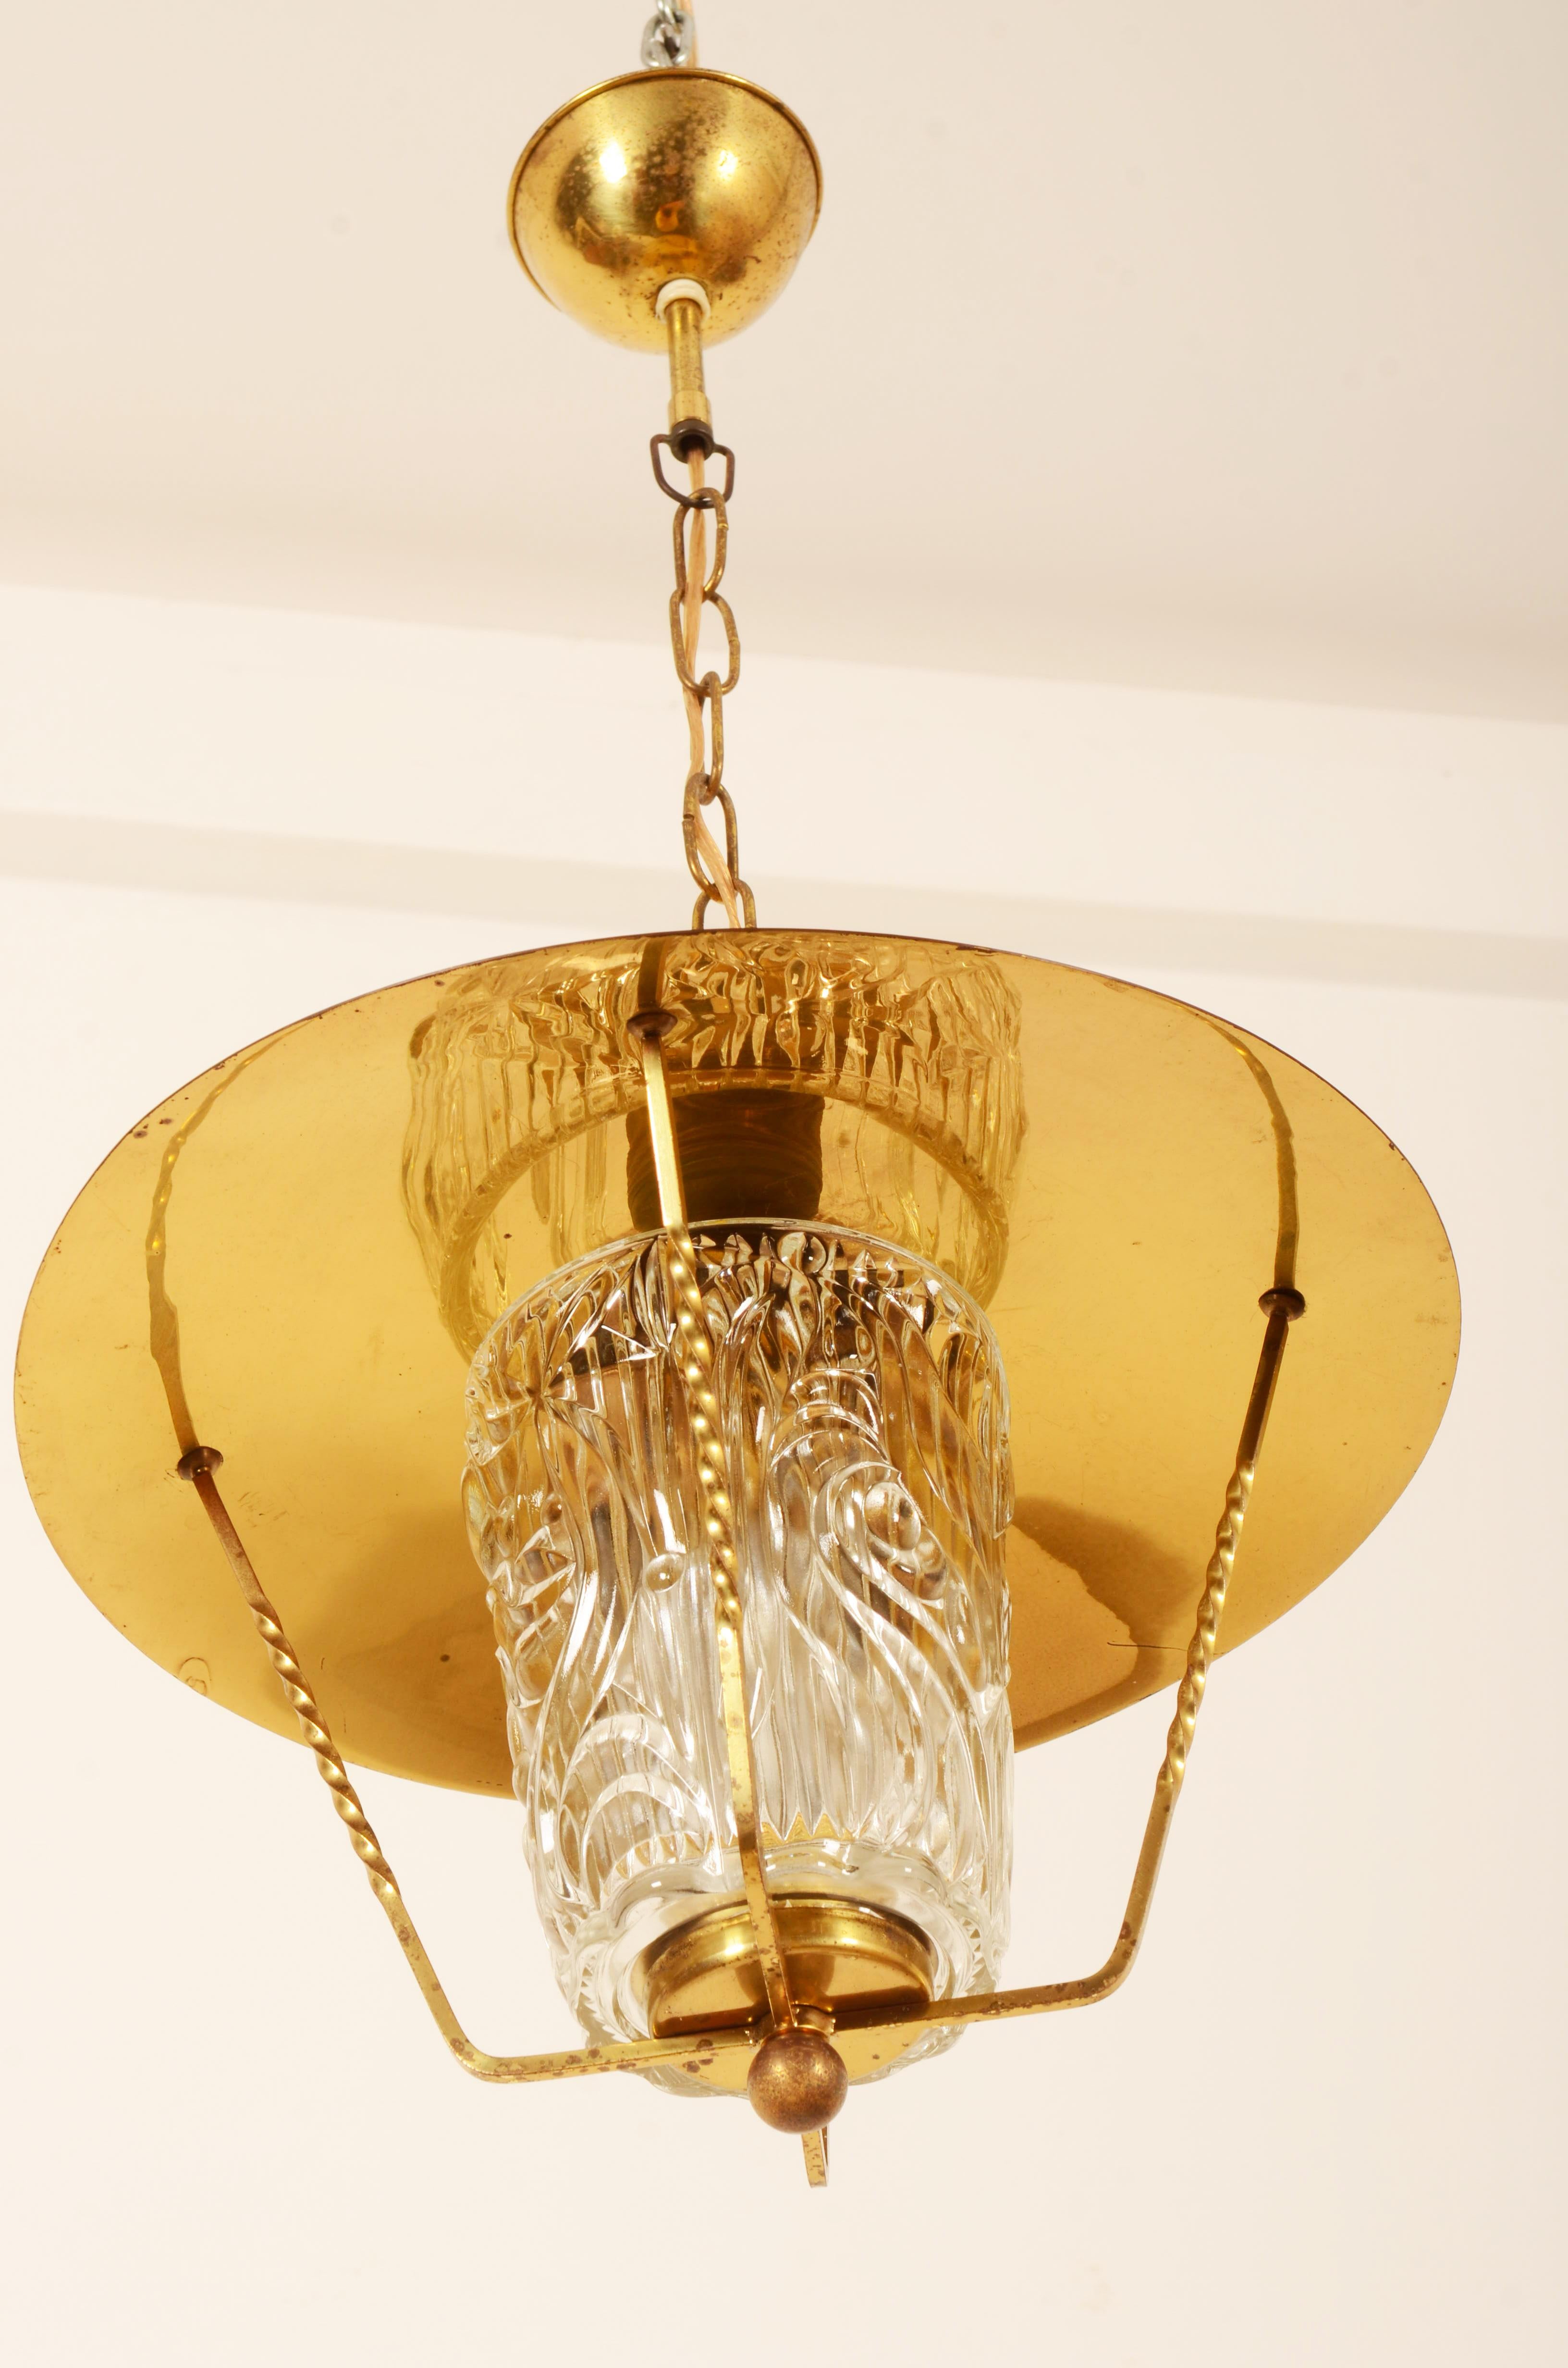 Austrian Midcentury Brass Pendant Lamp With Structured Glass Shade 